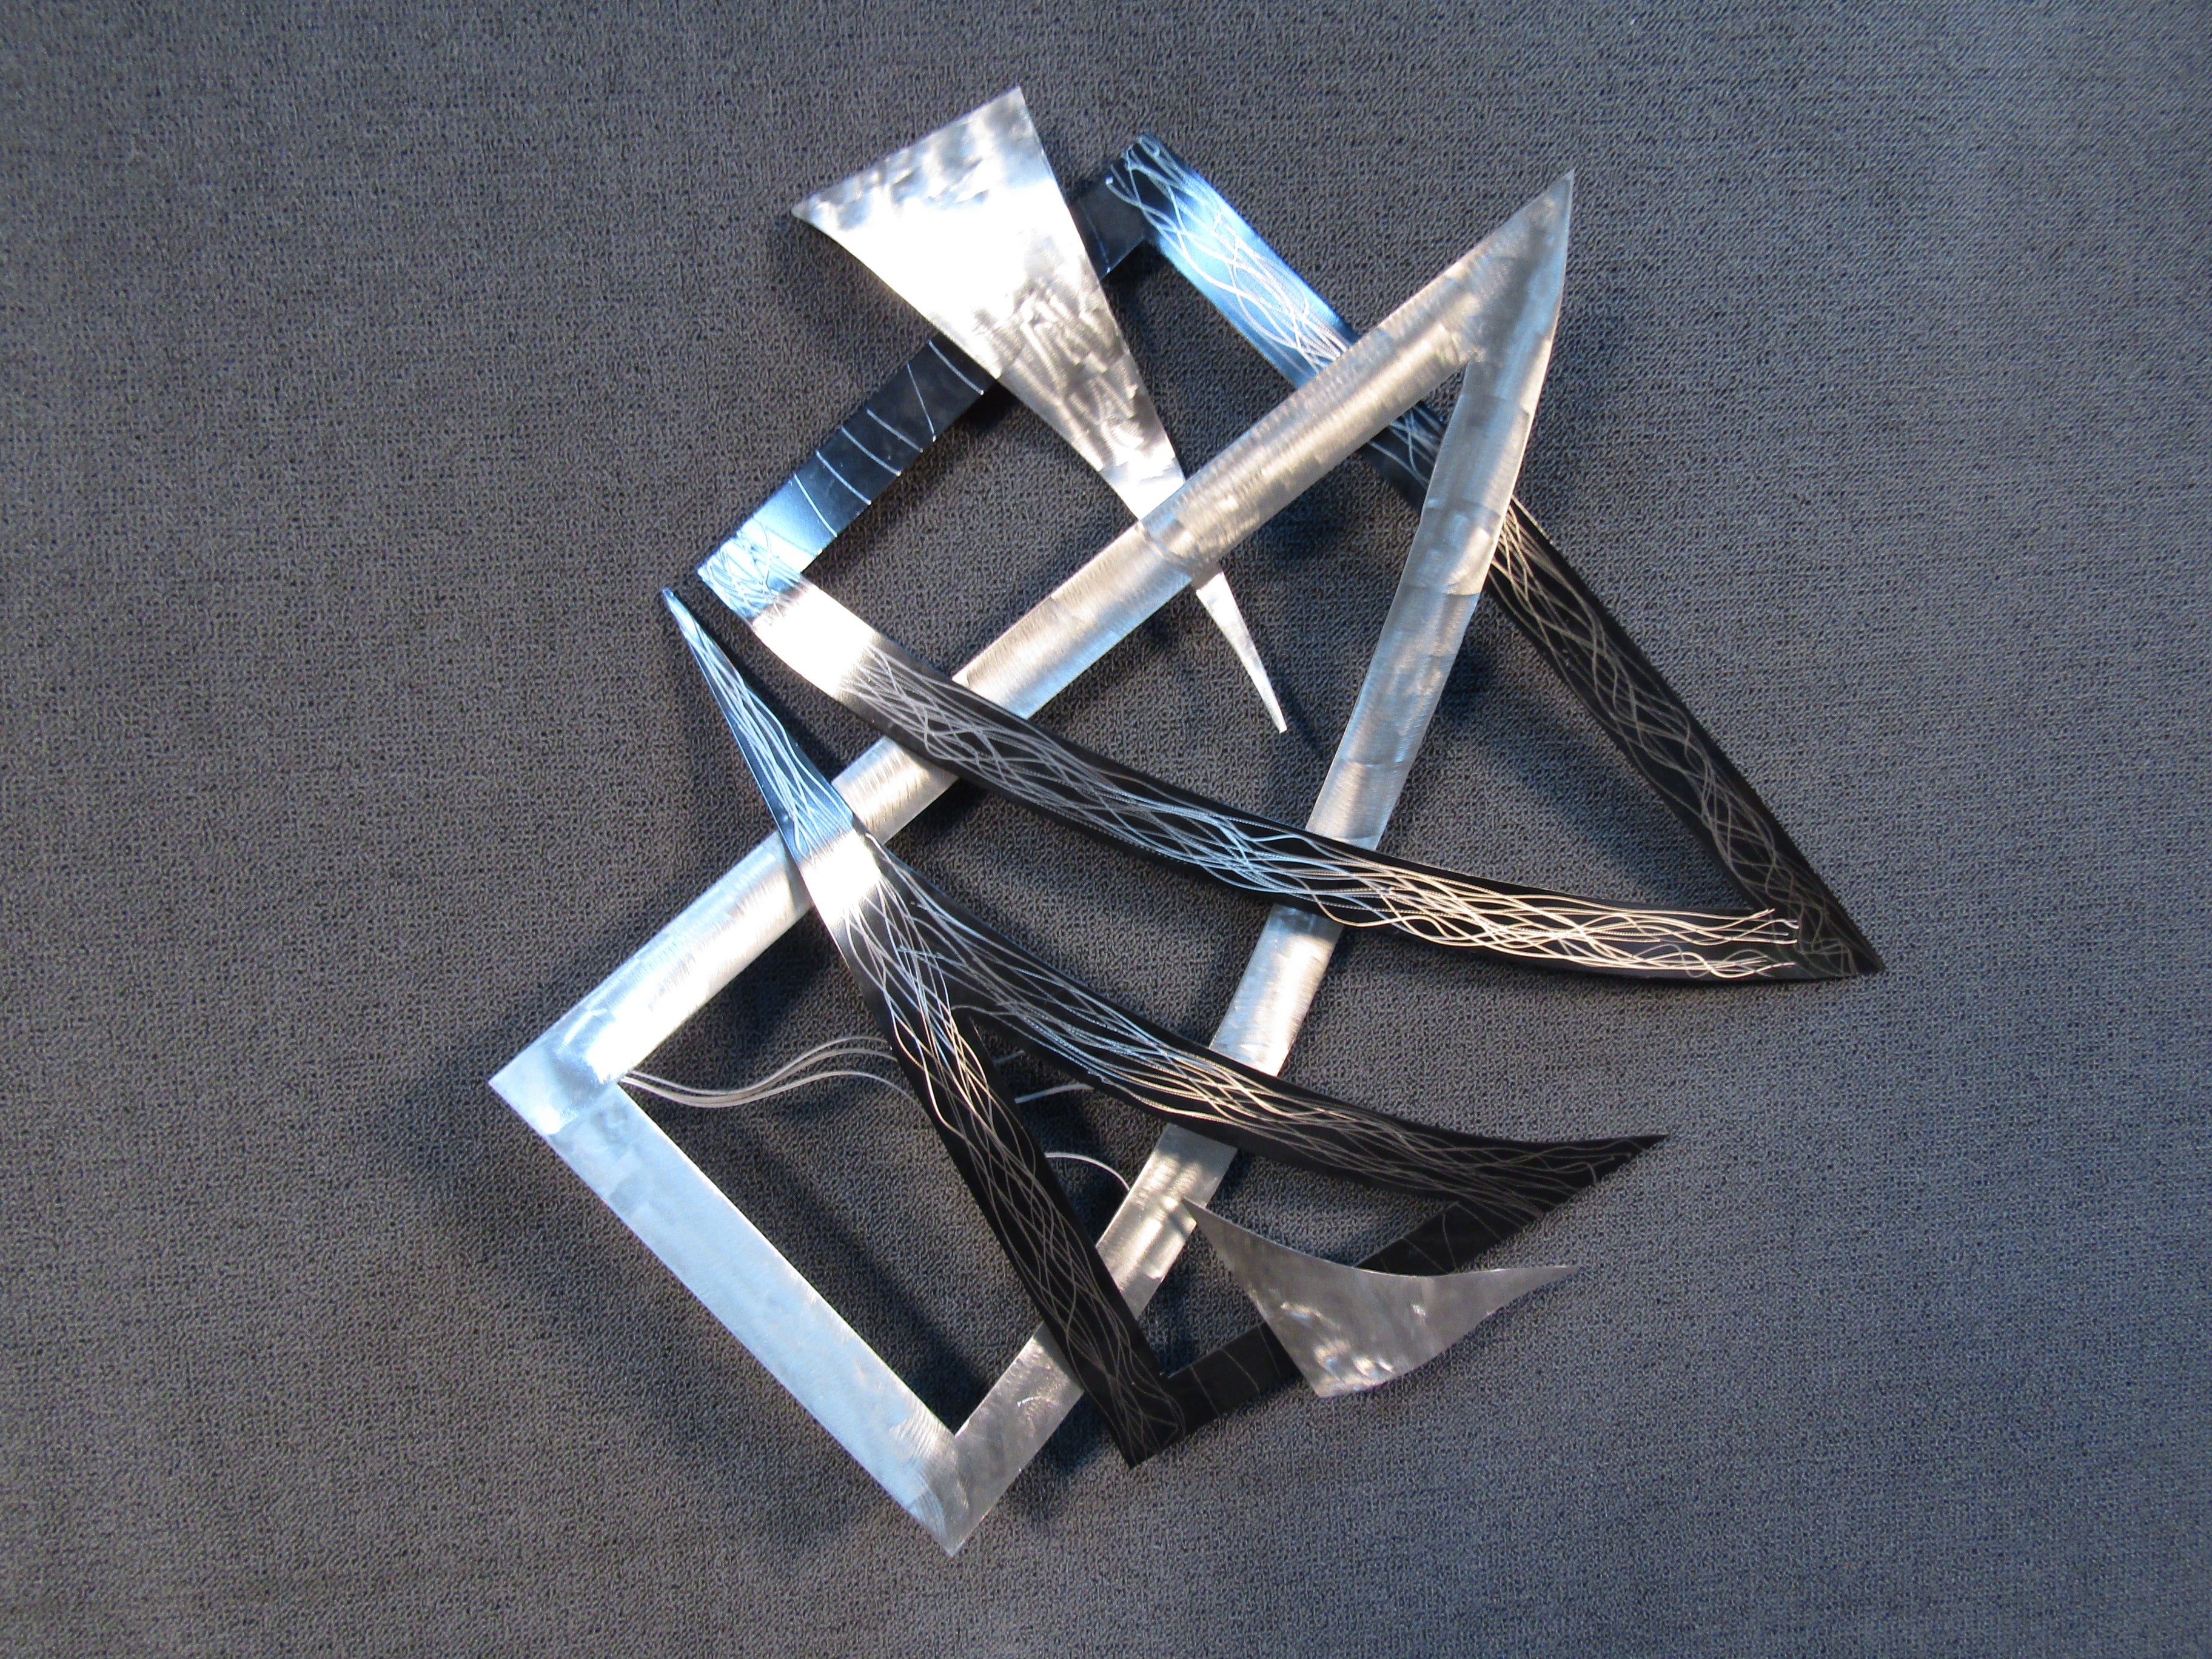 This vintage wall-mounted sculpture by Curtis Jere features geometric pieces of metal arranged in an abstract composition. Please confirm item location with seller (NY/NJ).